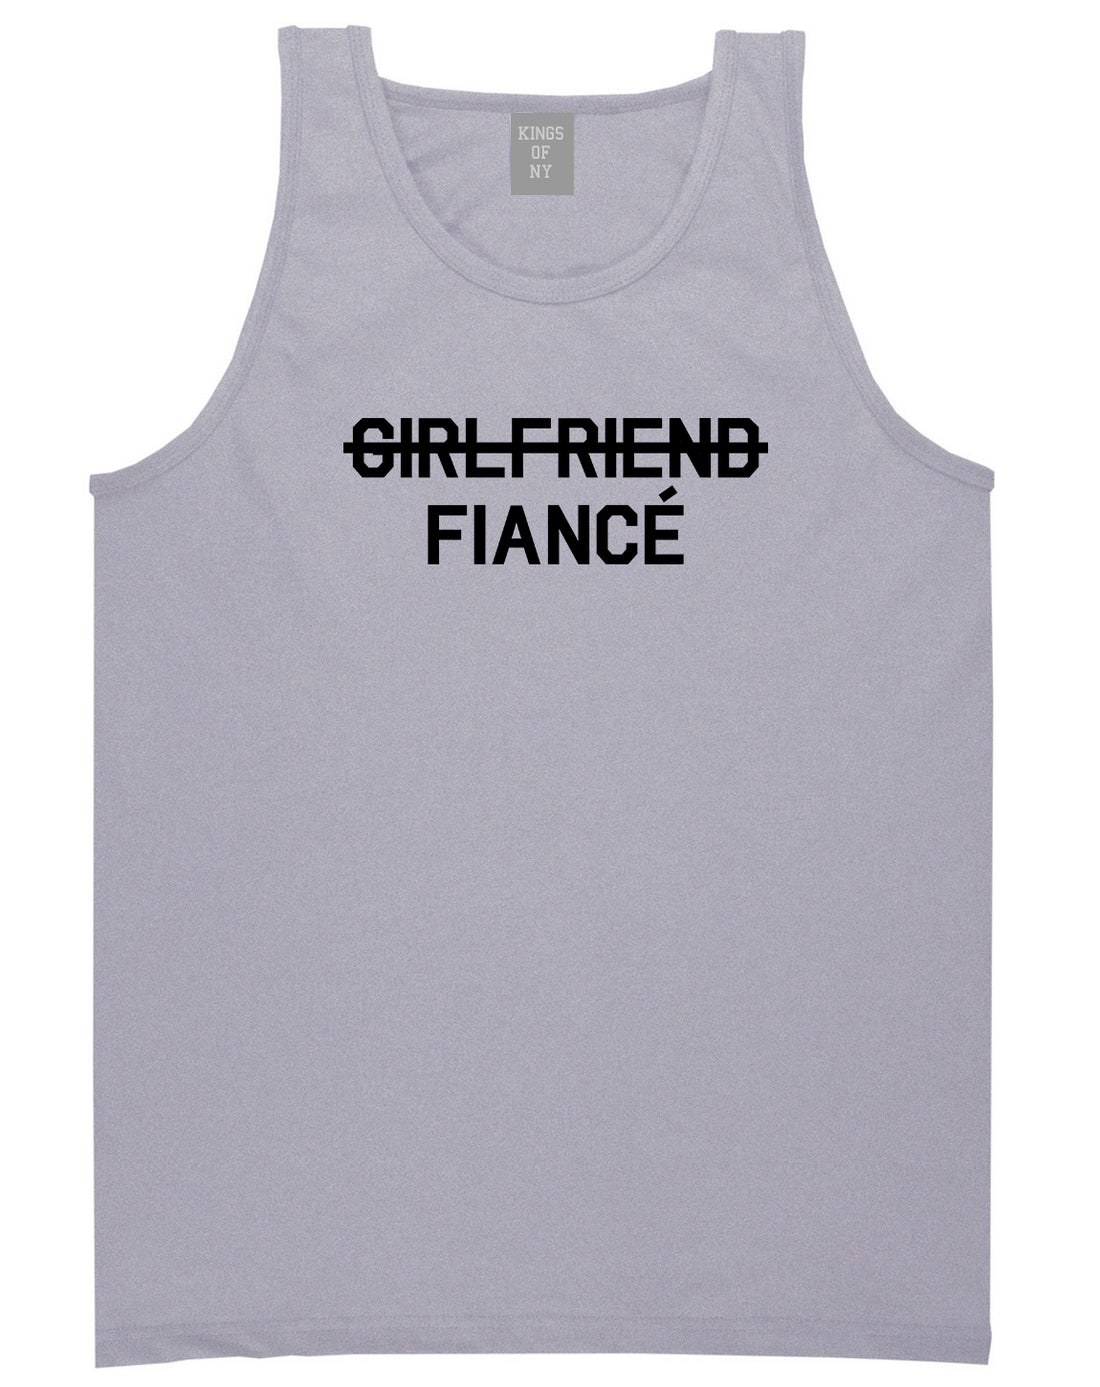 Girlfriend Fiance Engagement Mens Grey Tank Top Shirt by KINGS OF NY